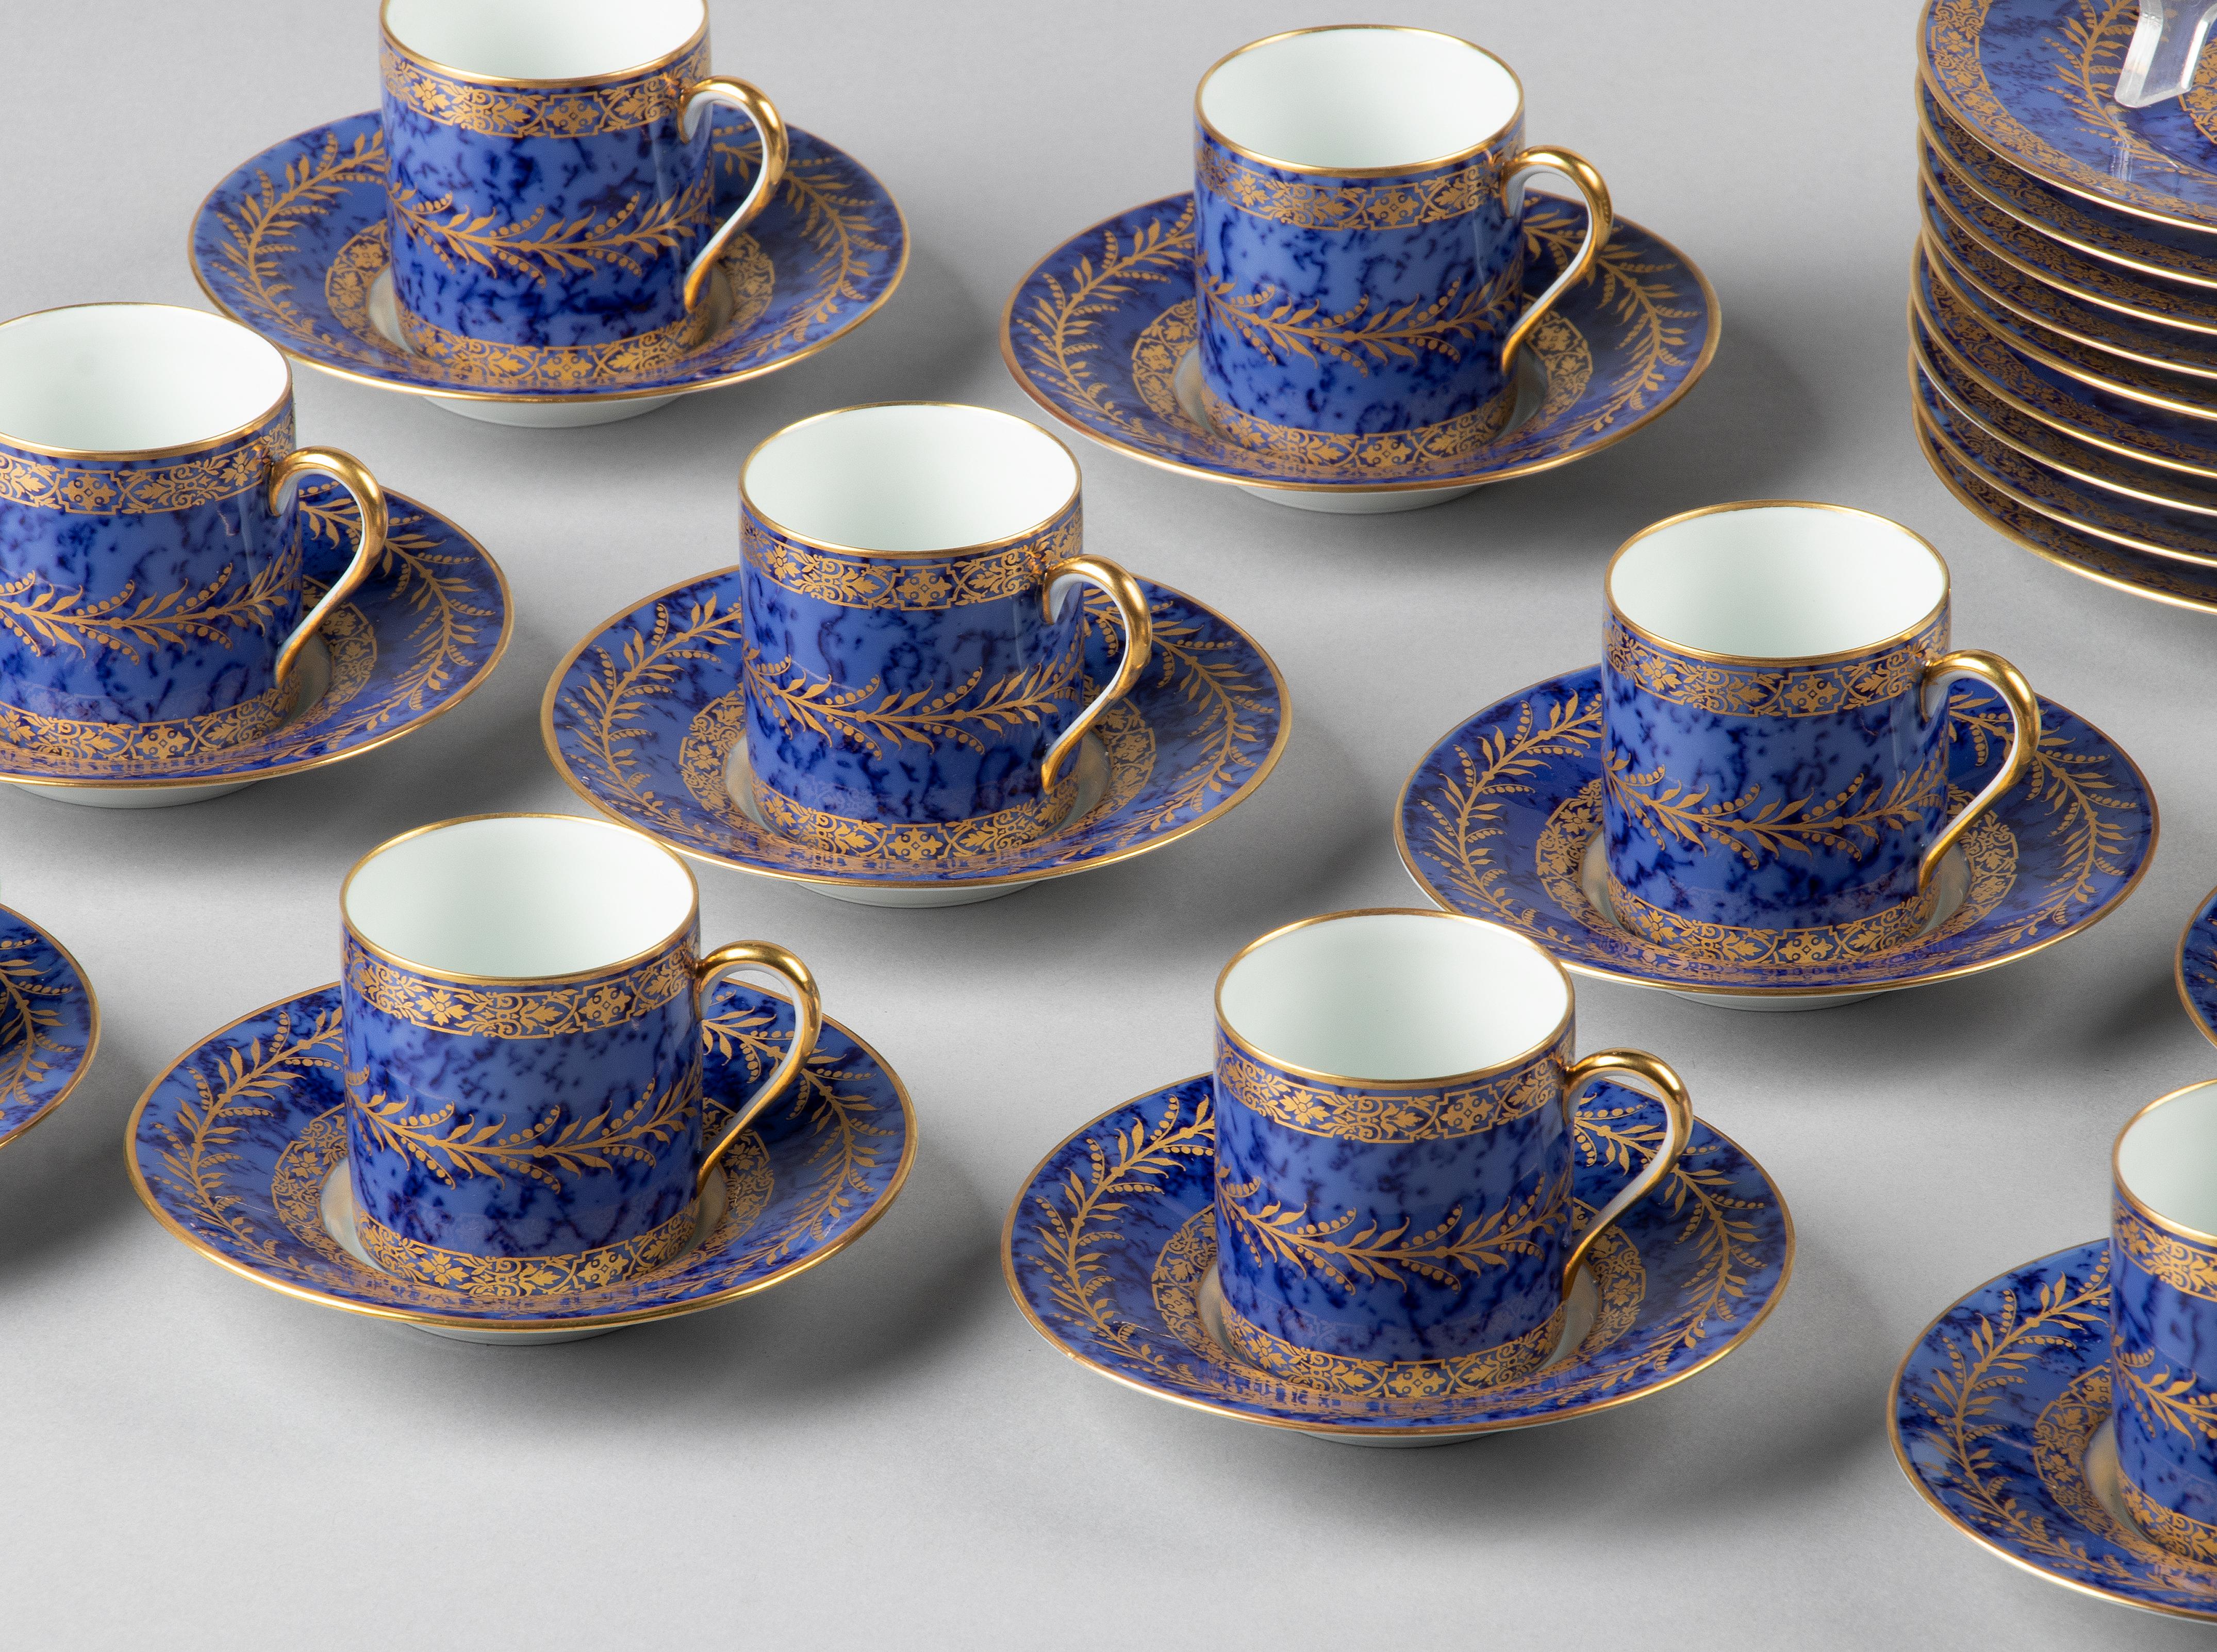 Empire 20-Piece Porcelain Tea Set Made by Raynaud Limoges